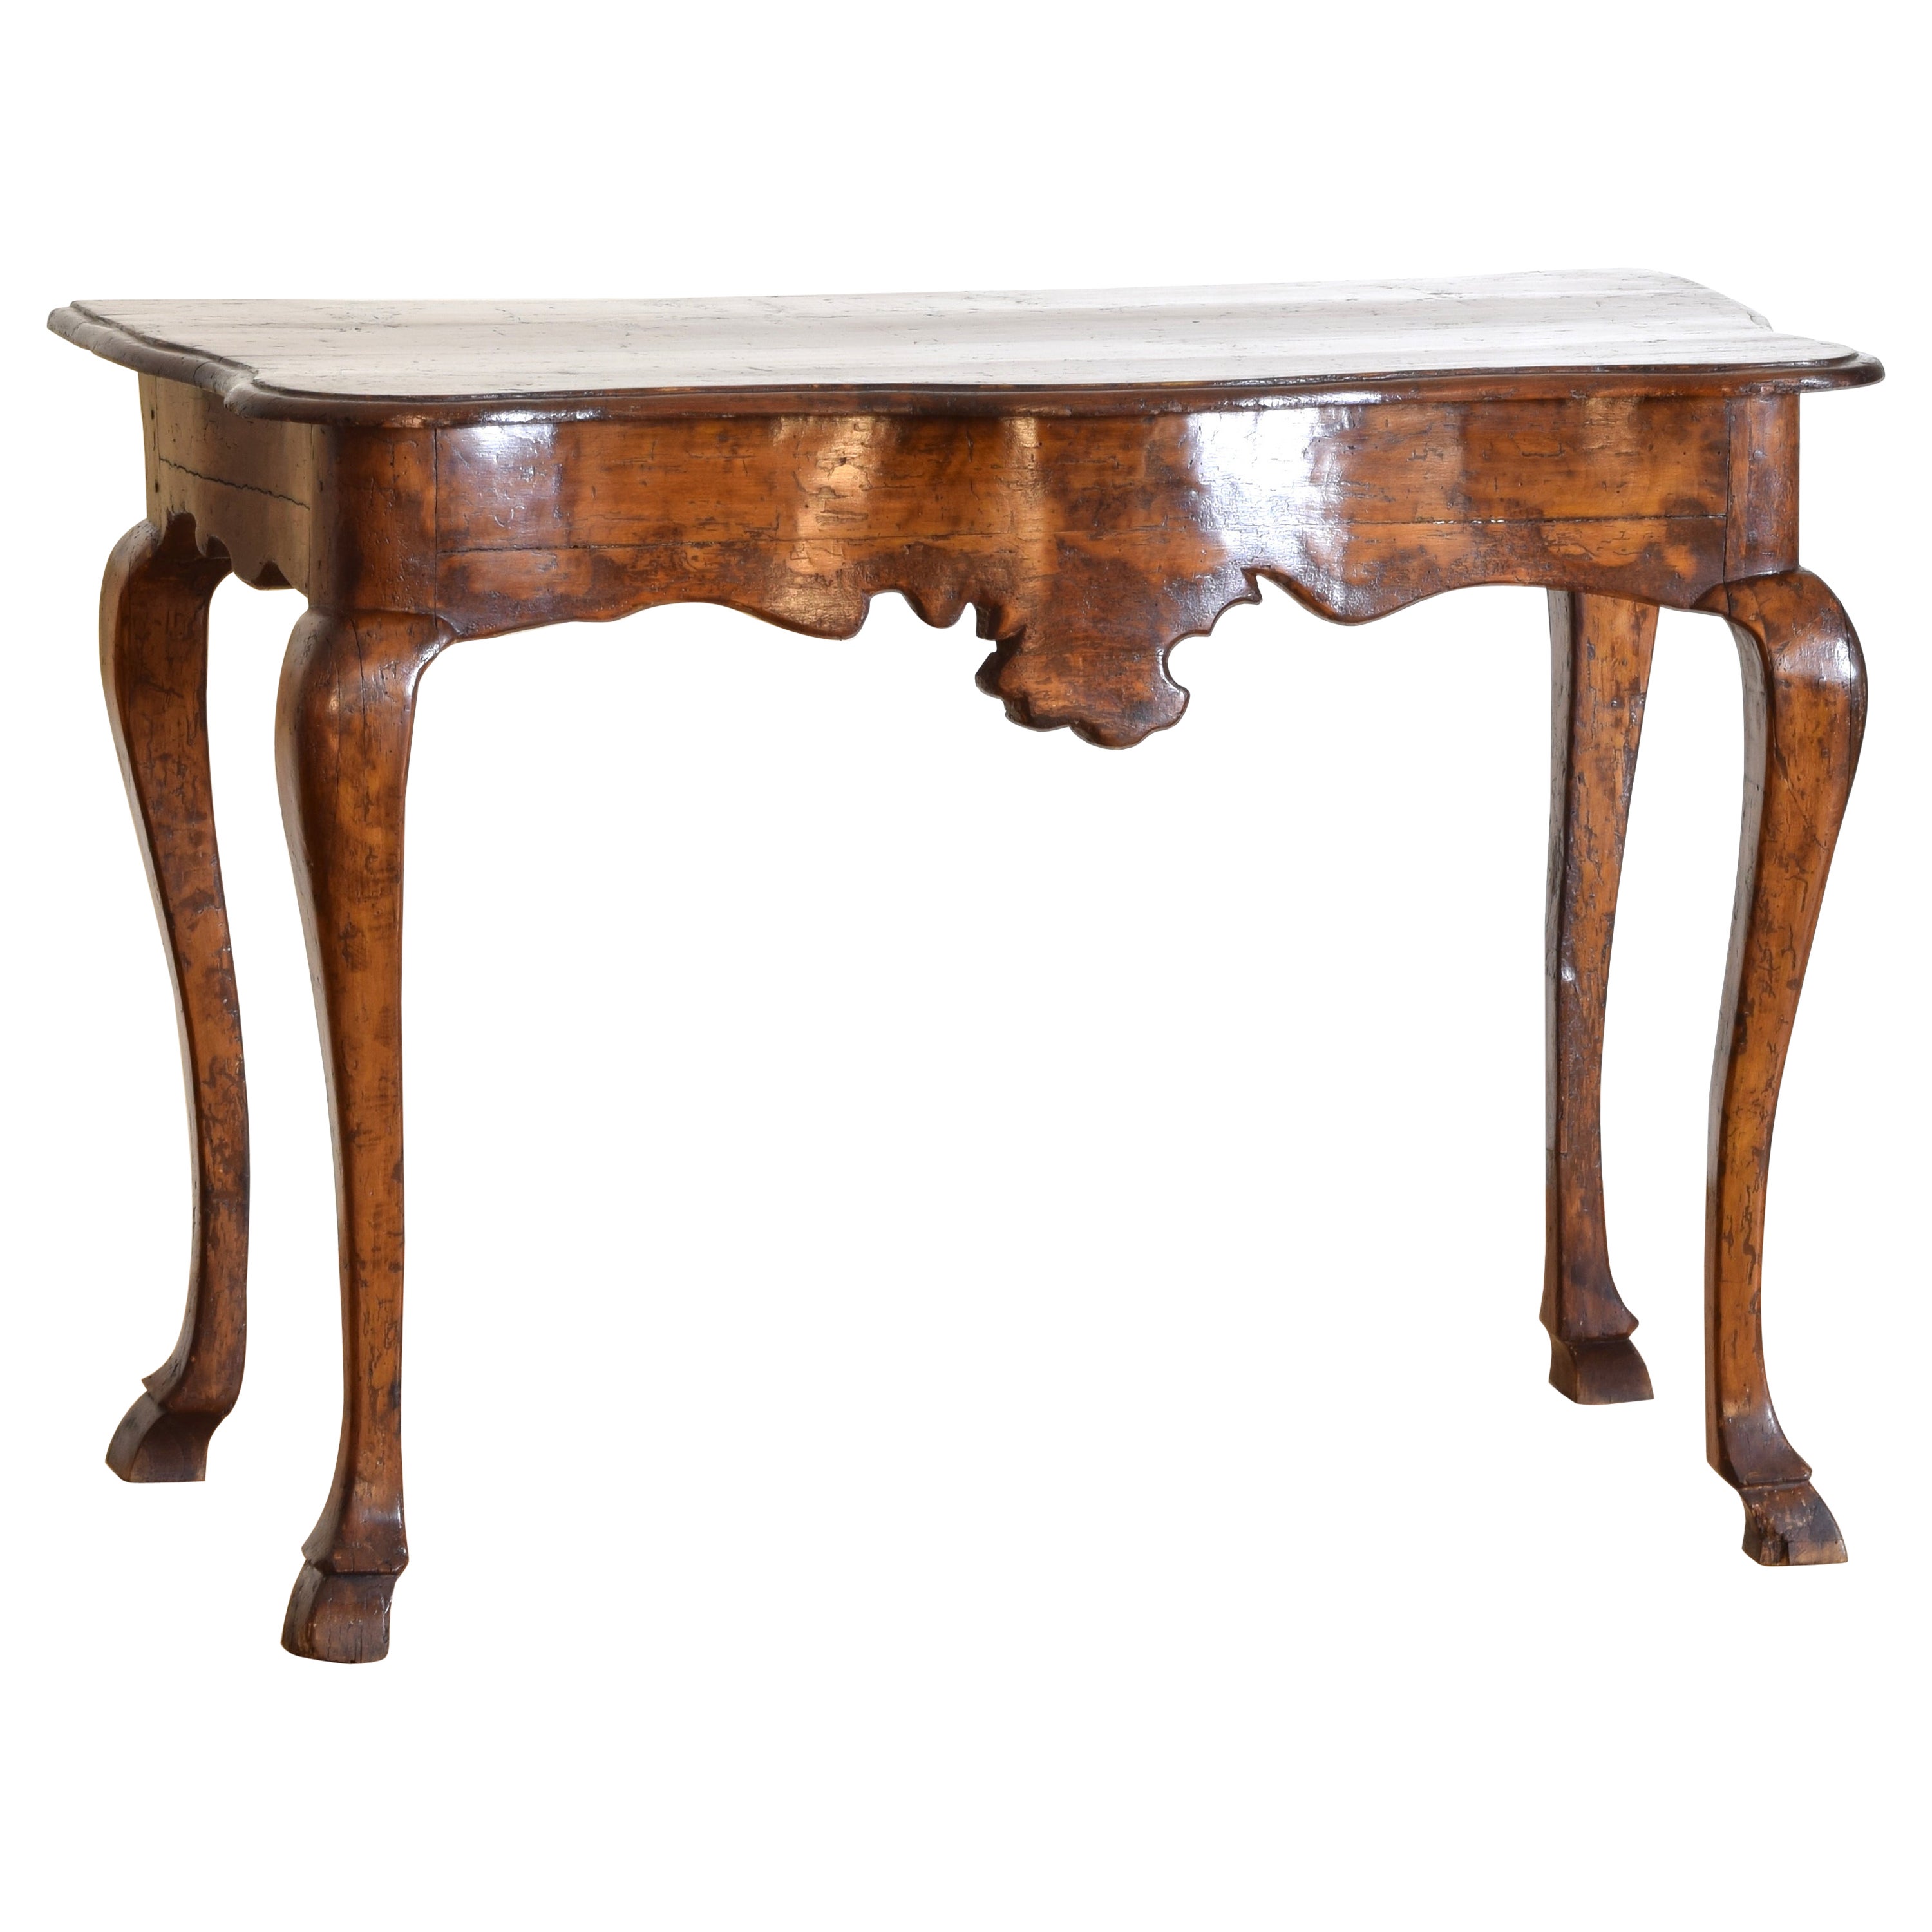 Italian, Tuscan, Louis XIV Shaped Walnut & Fir Wood Console Table, mid 18th c For Sale